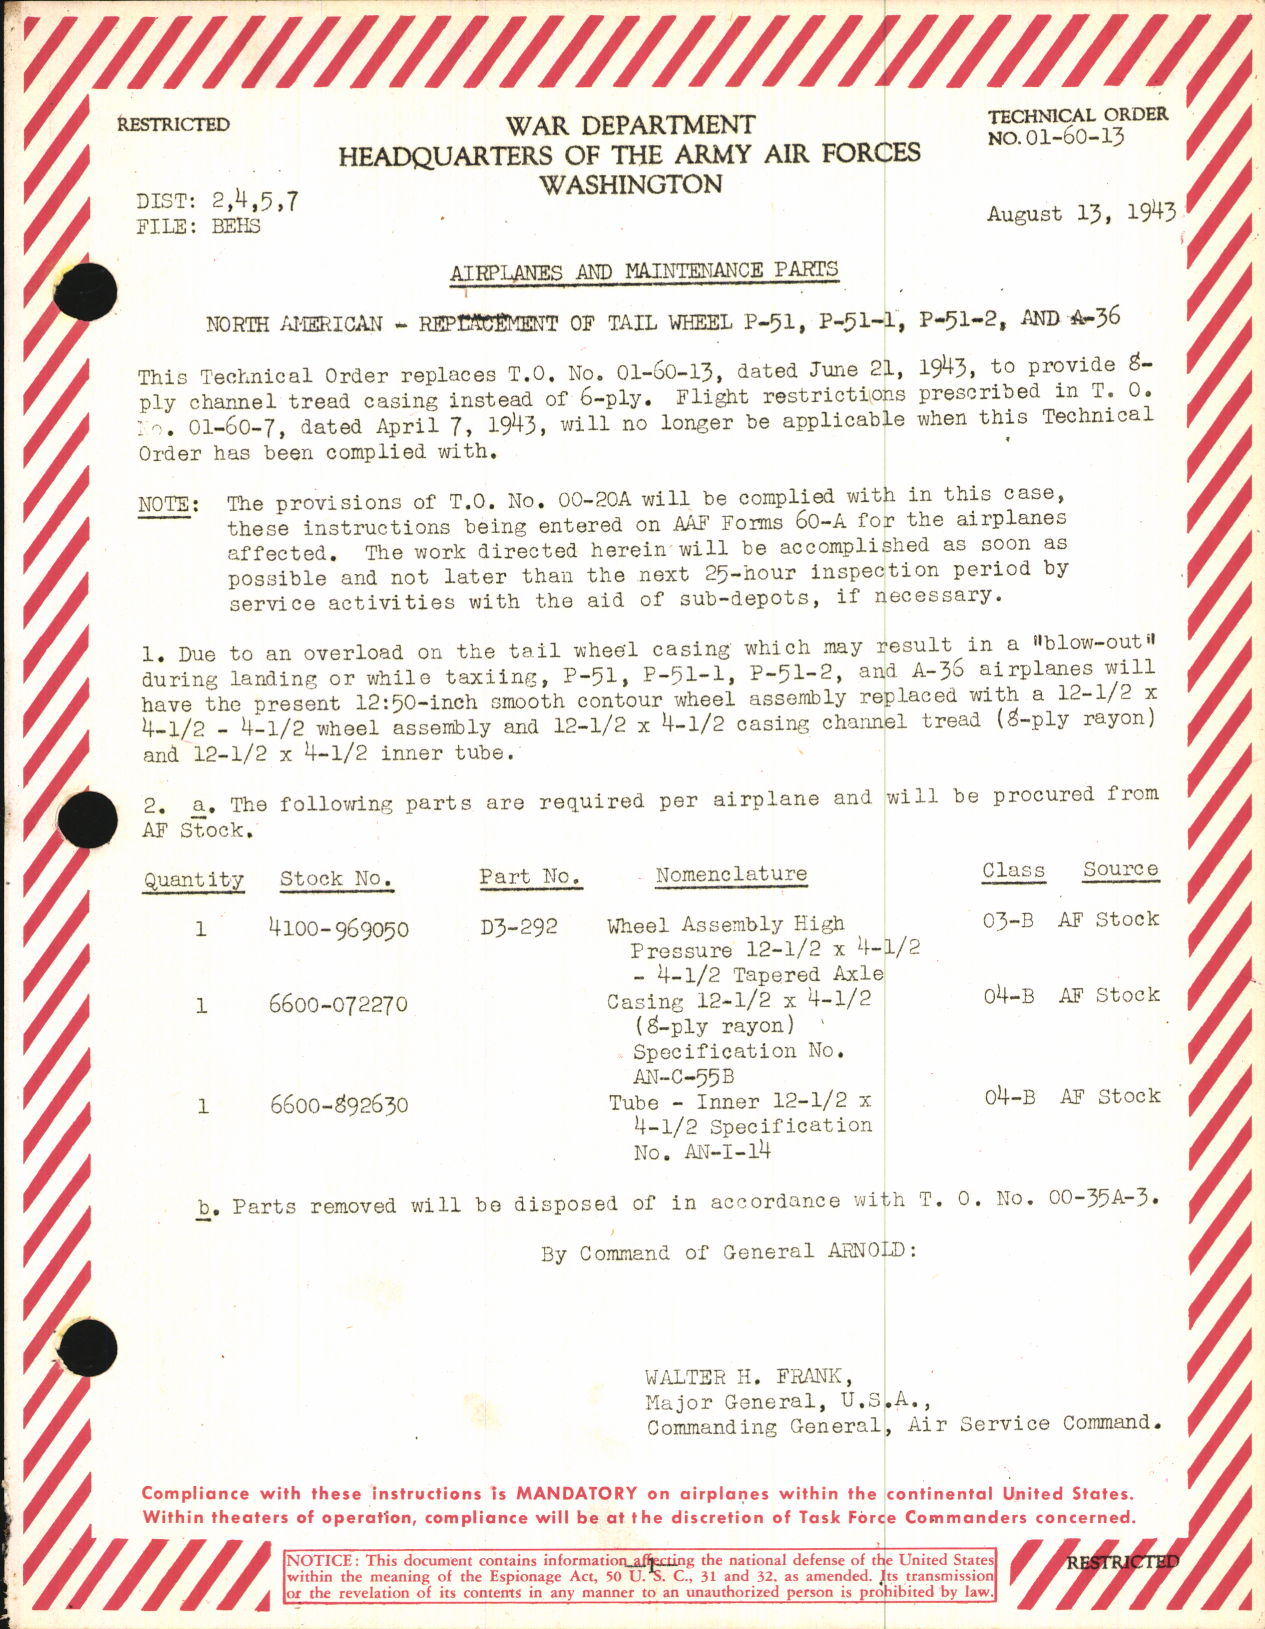 Sample page 1 from AirCorps Library document: Replacement of Tail Wheel for P-51, P-51-1, P-51-2, and A-36